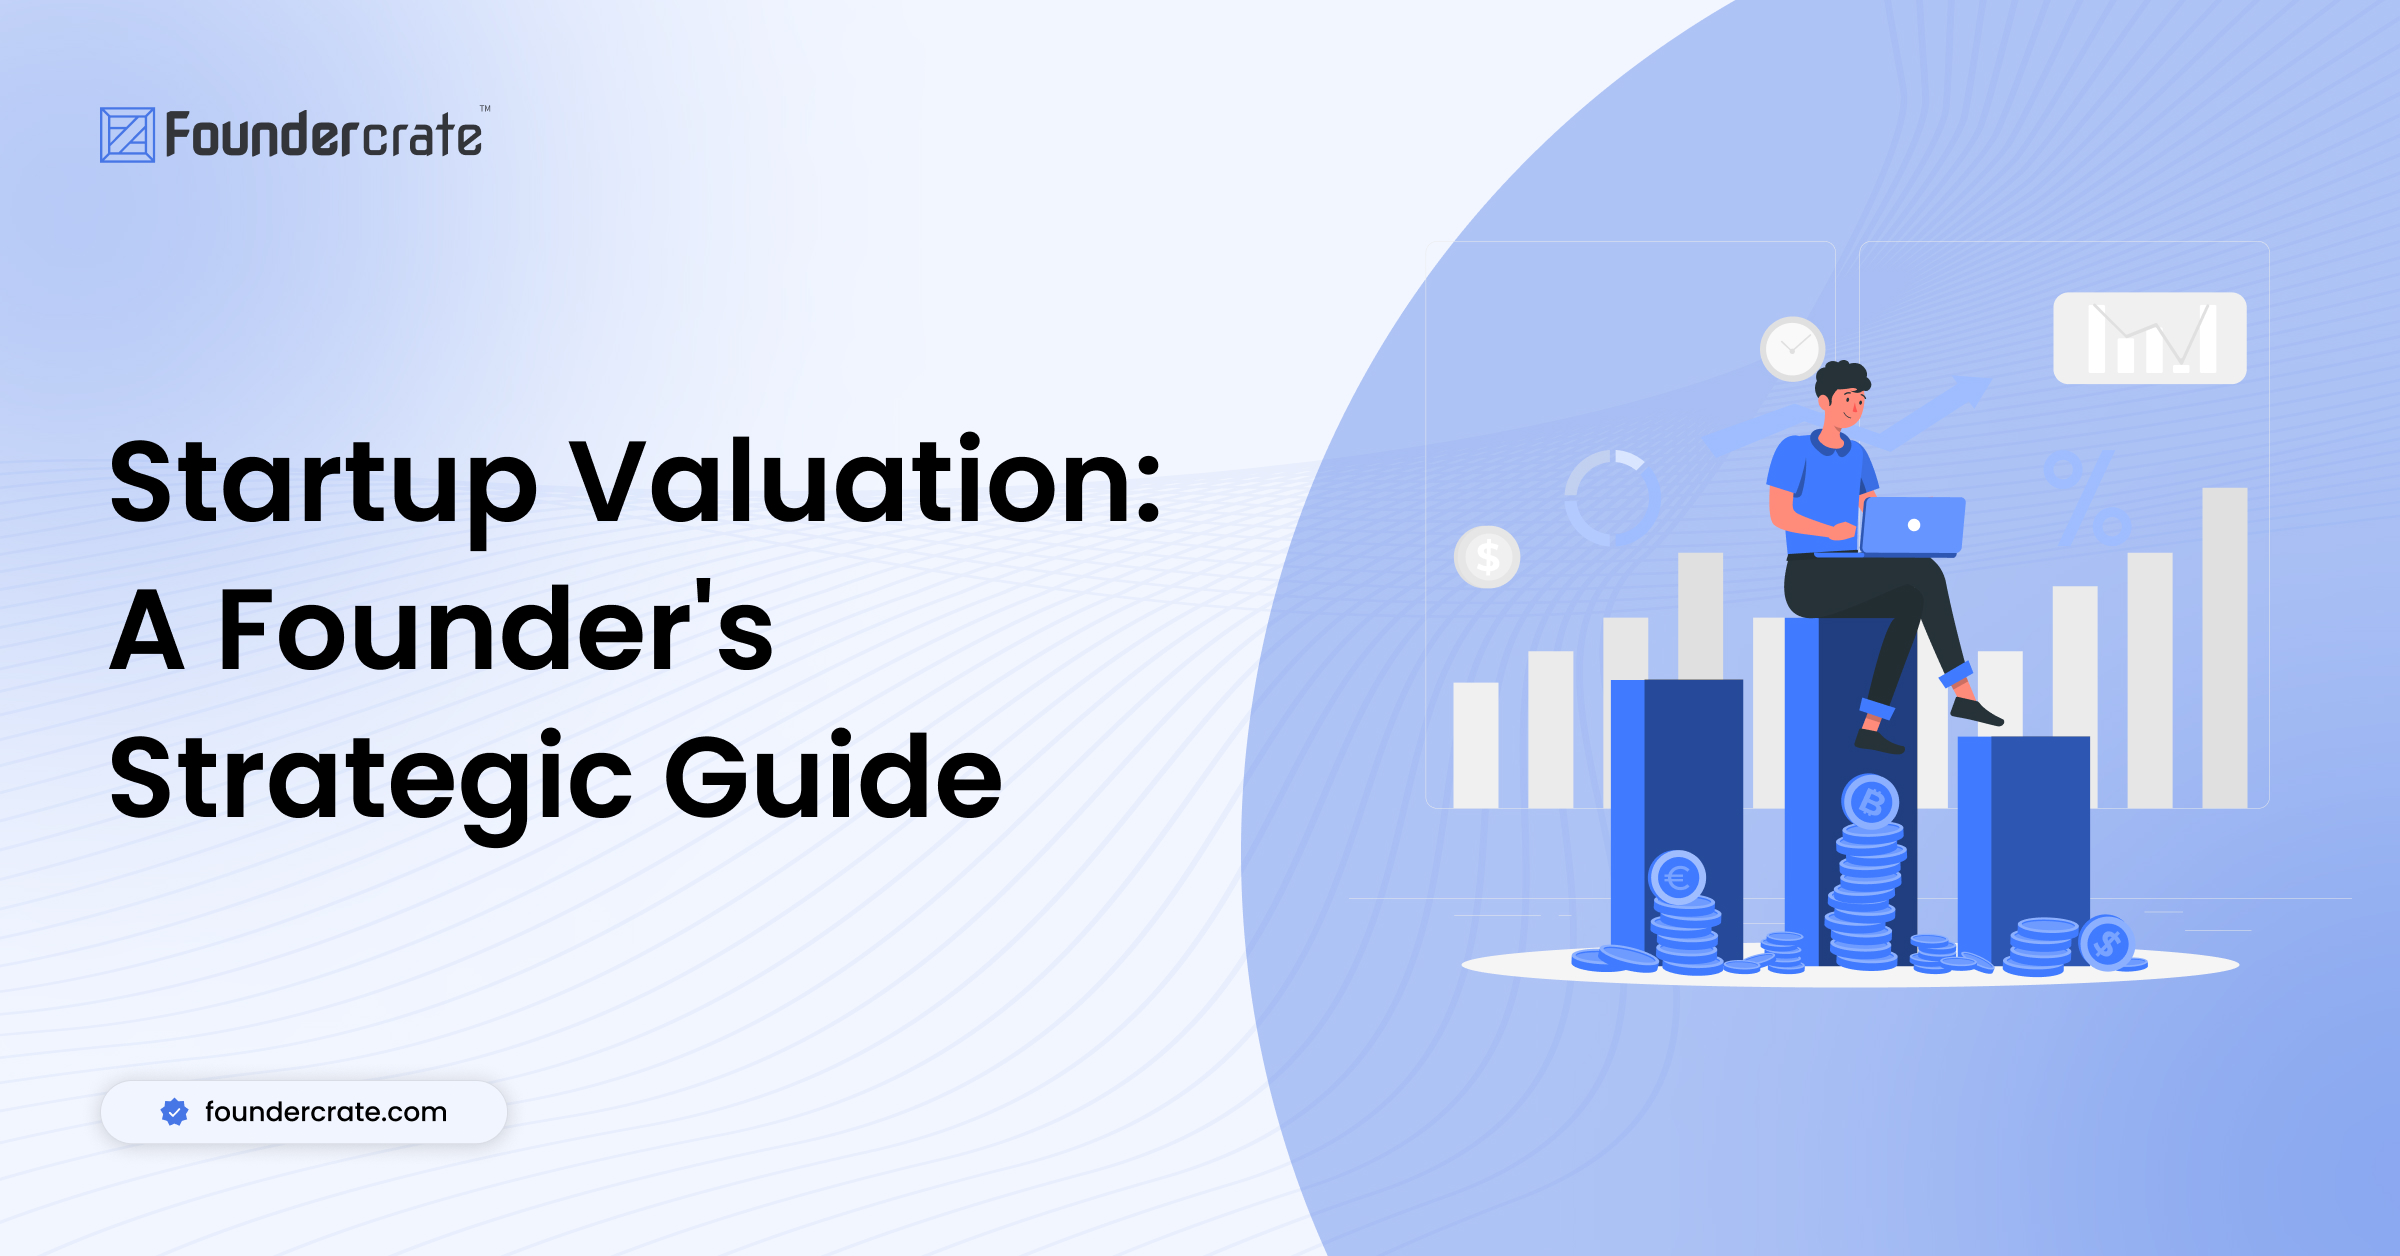 Startup Valuation: A Founder's Strategic Guide - Foundercrate